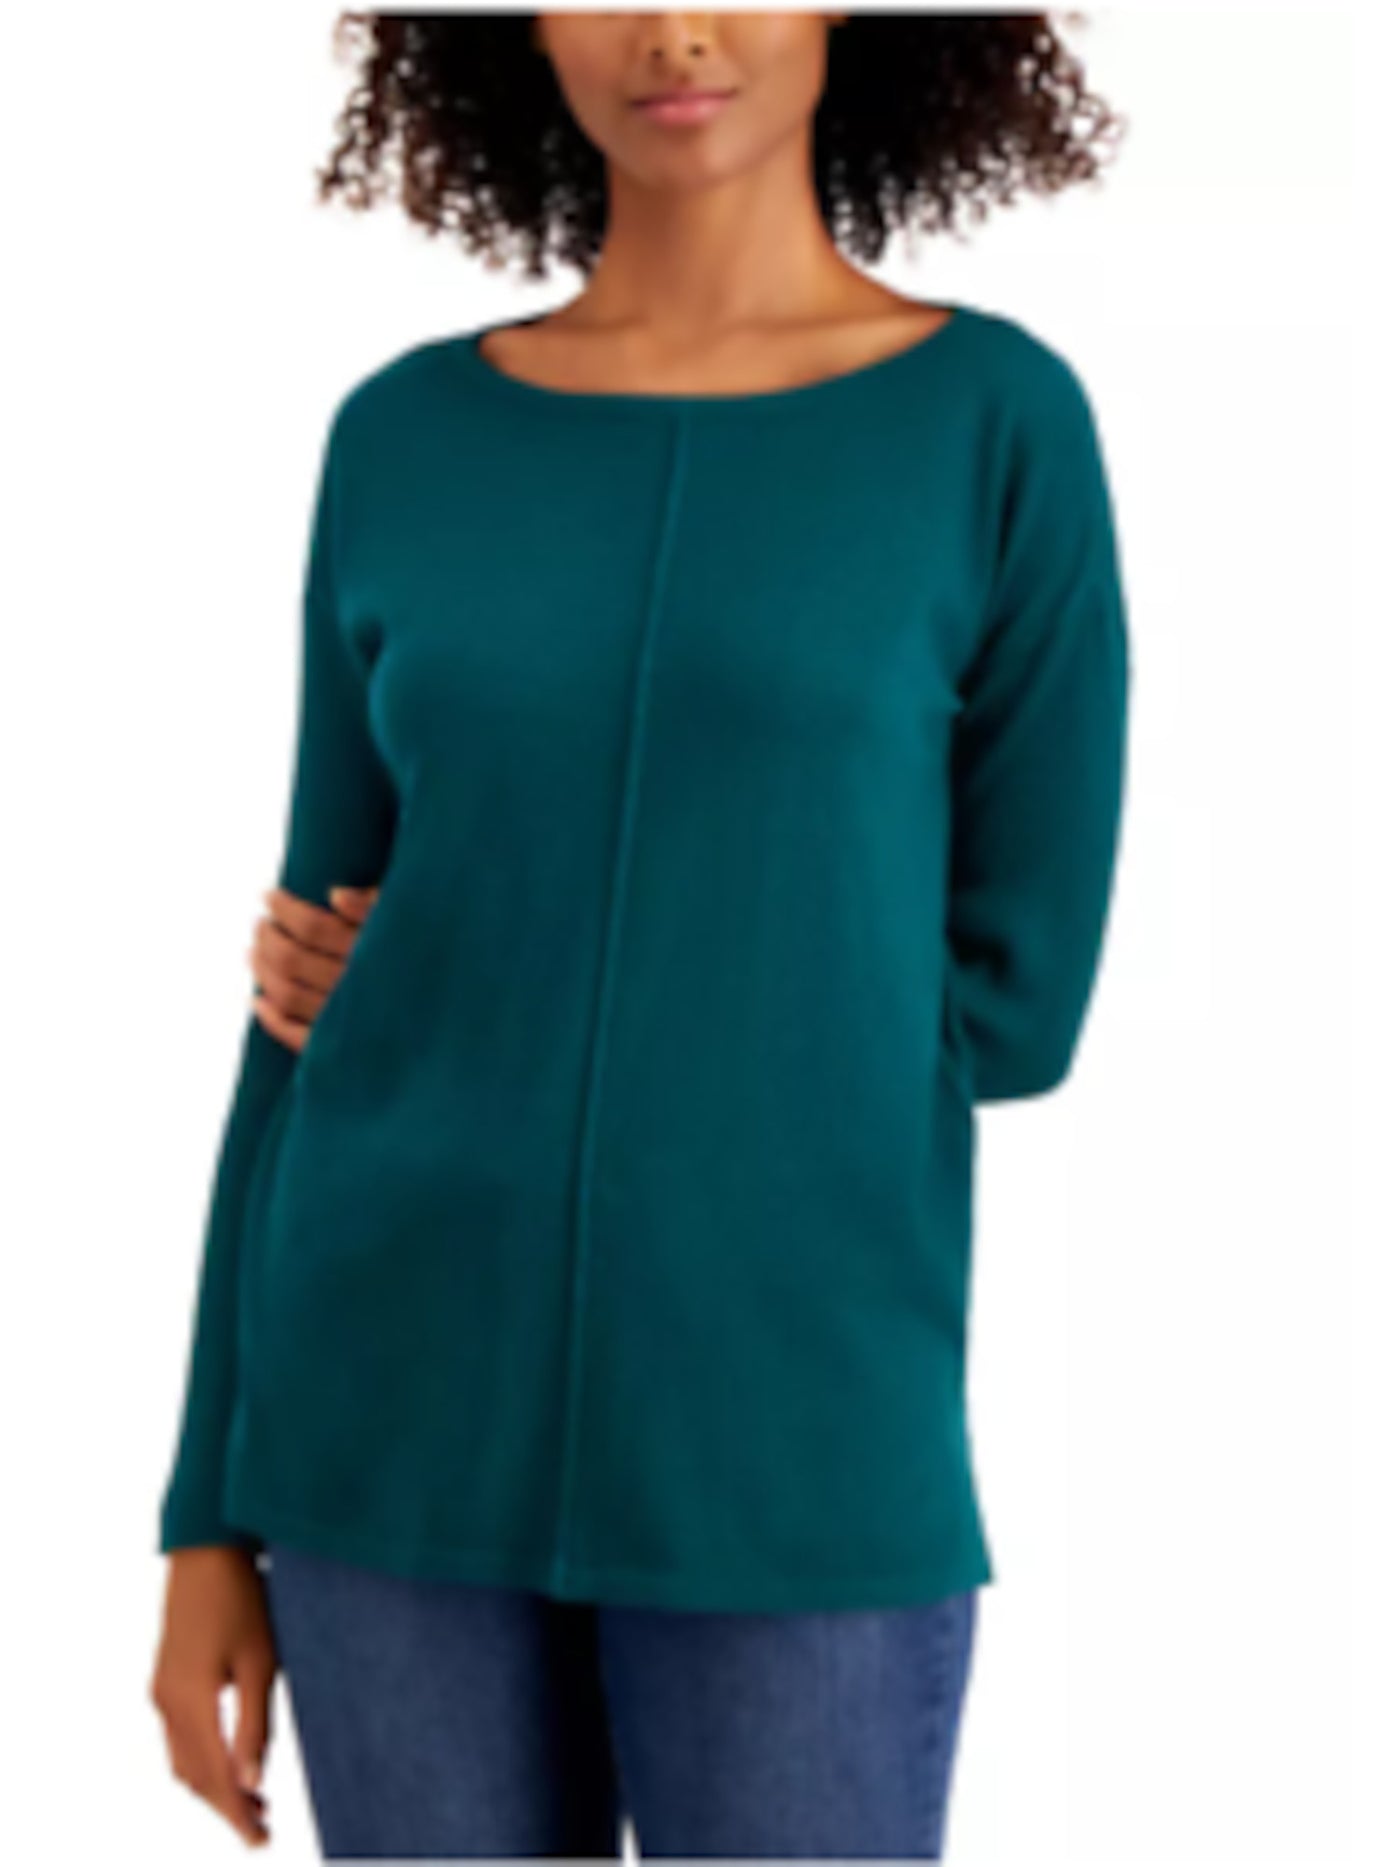 STYLE & COMPANY Womens Teal Stretch Ribbed Slitted Seam-front Long Sleeve Boat Neck Wear To Work Tunic Sweater Plus 0X